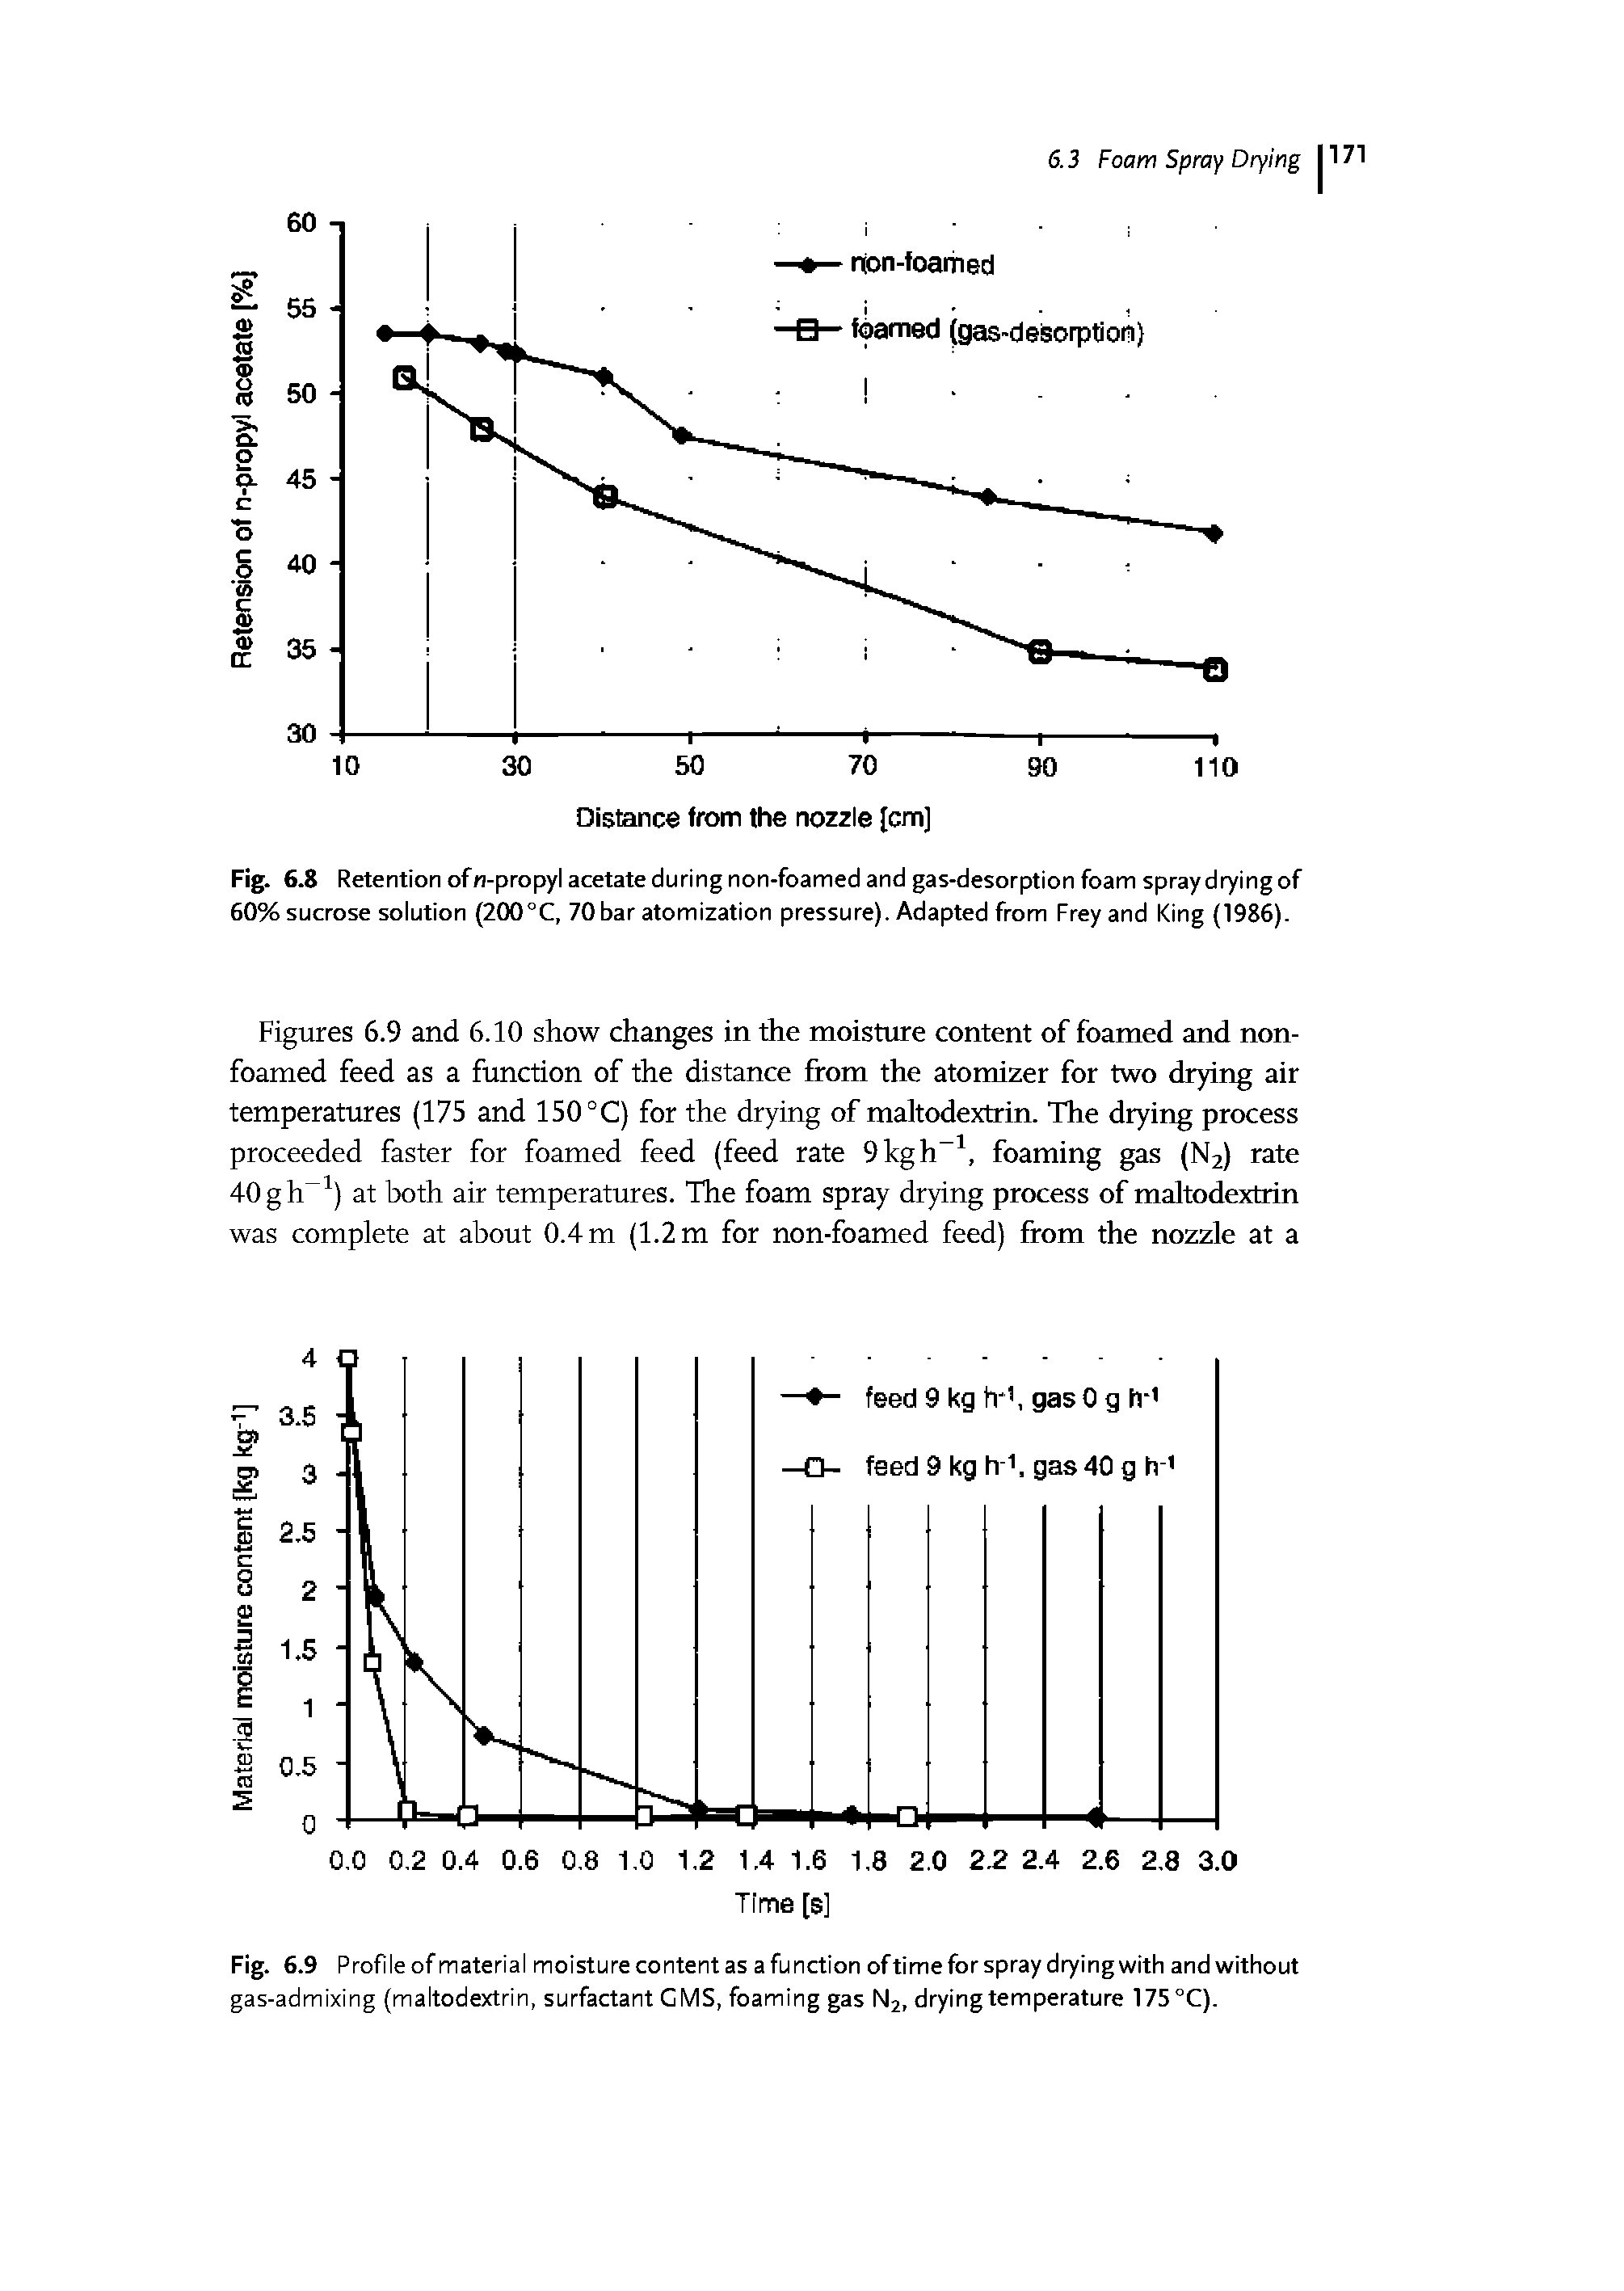 Figures 6.9 and 6.10 show changes in the moisture content of foamed and non-foamed feed as a function of the distance from the atomizer for two drying air temperatures (175 and 150 °C) for the drying of maltodextrin. The drying process proceeded faster for foamed feed (feed rate 9kgh , foaming gas (N2) rate 40 gh ) at both air temperatures. The foam spray drying process of maltodextrin was complete at about 0.4 m (1.2 m for non-foamed feed) from the nozzle at a...